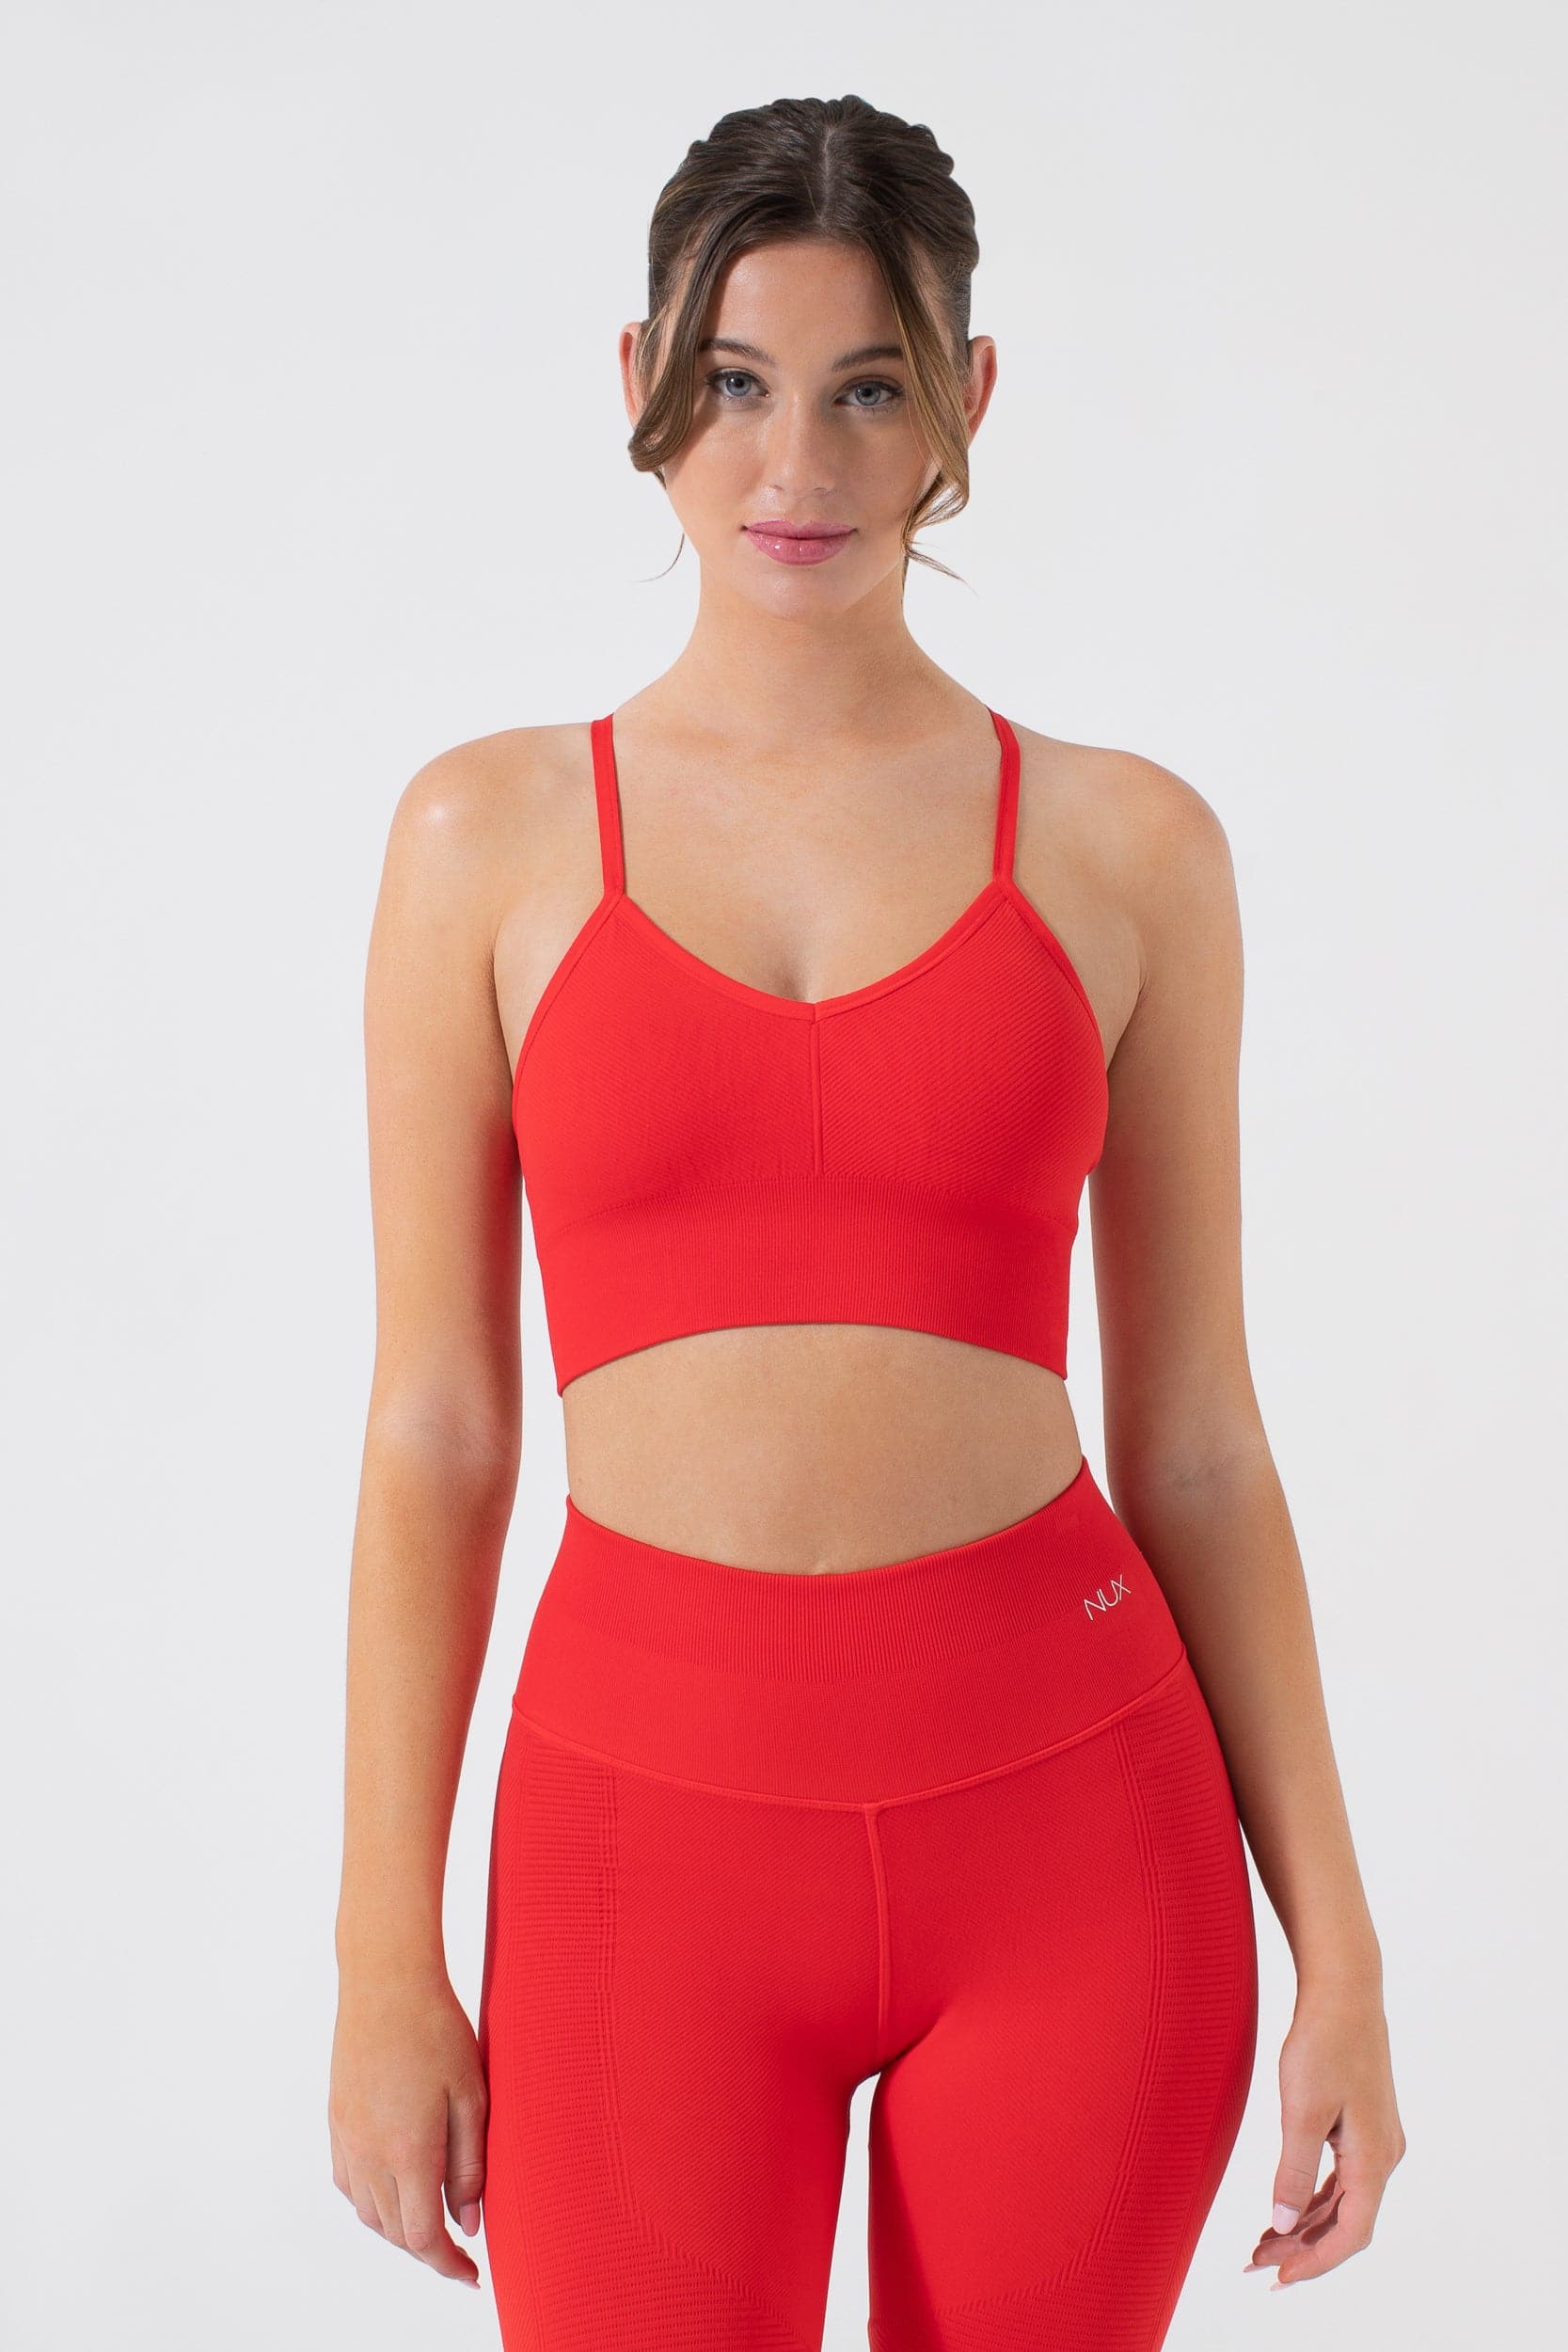 Ozone Activewear RED SPORTS BRA - SMOOTH & PUFFY (WT2011) 